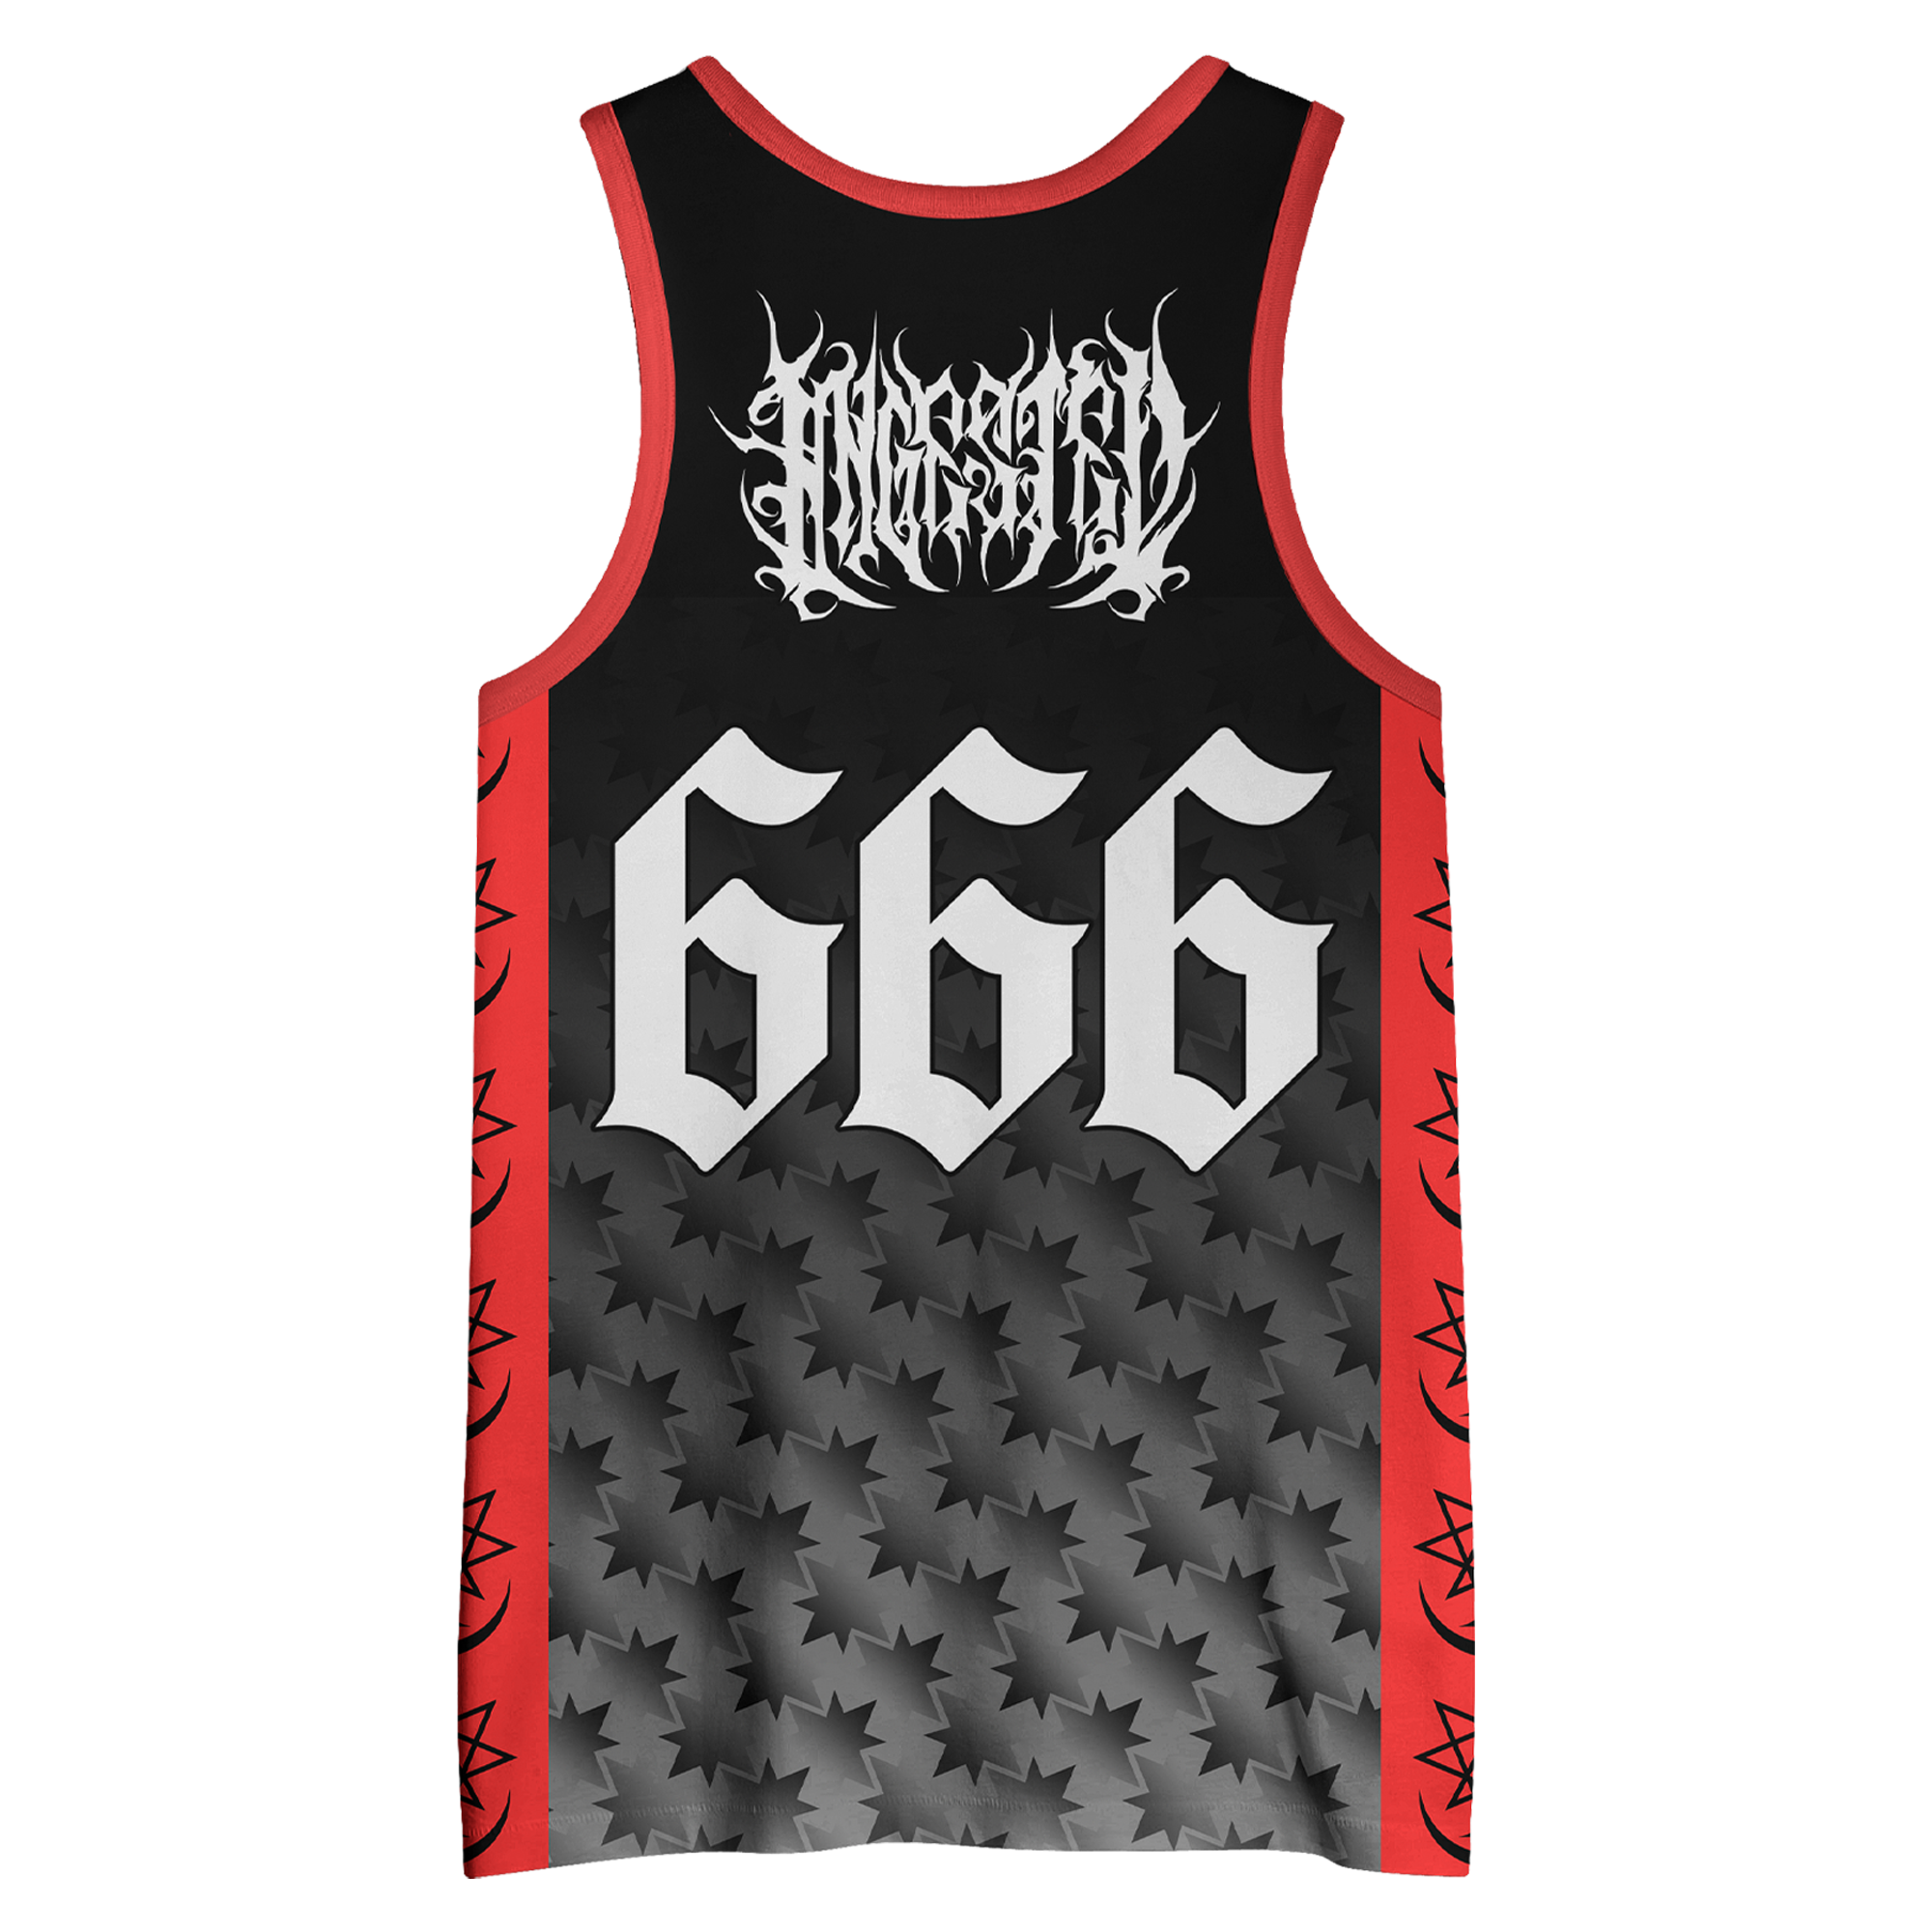 Ingested - Basketball Jersey